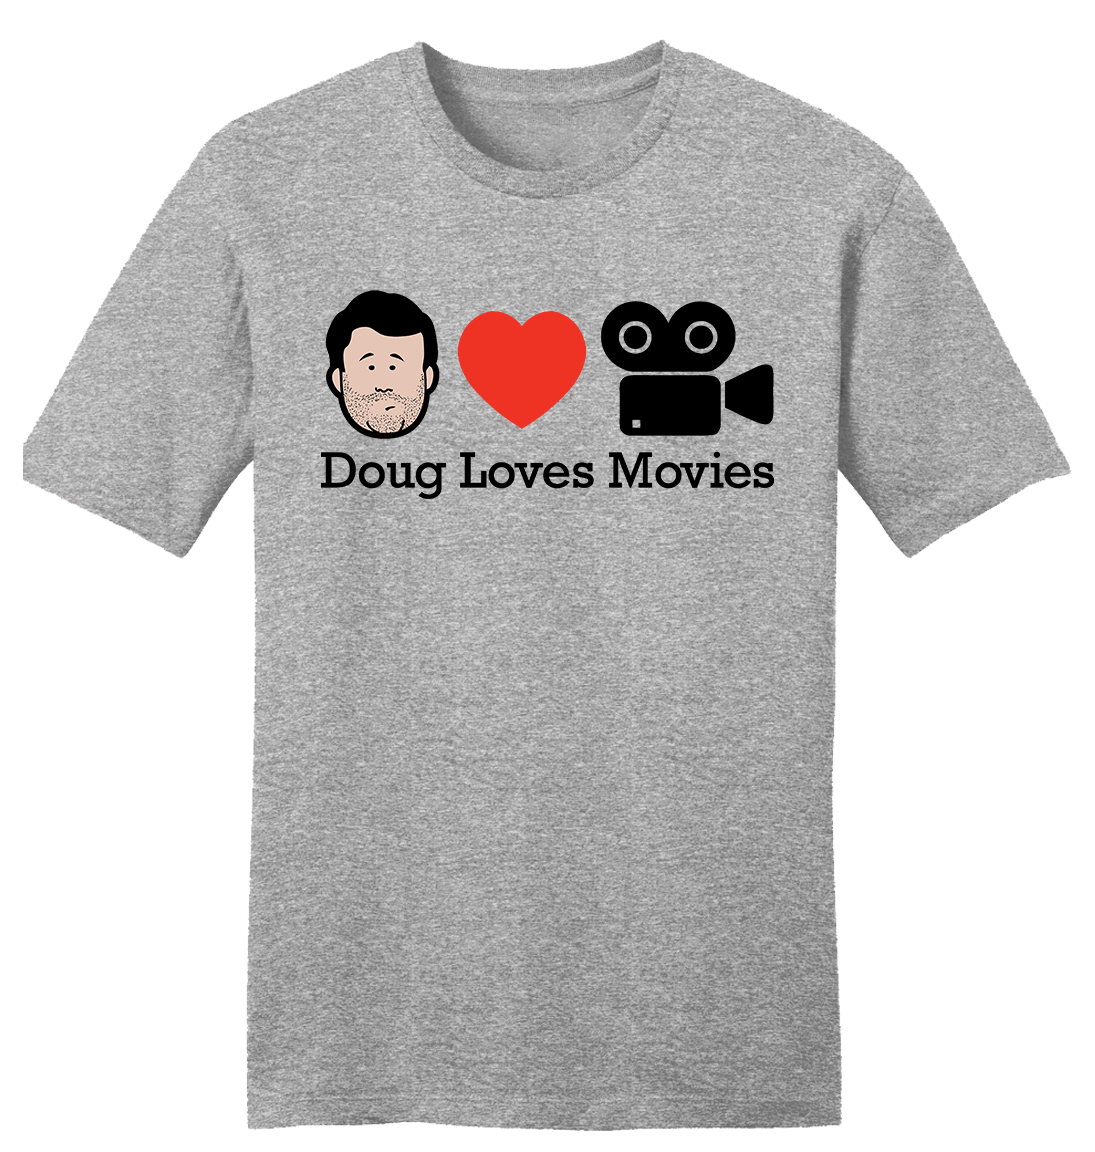 Doug Loves Movies Official T-shirt